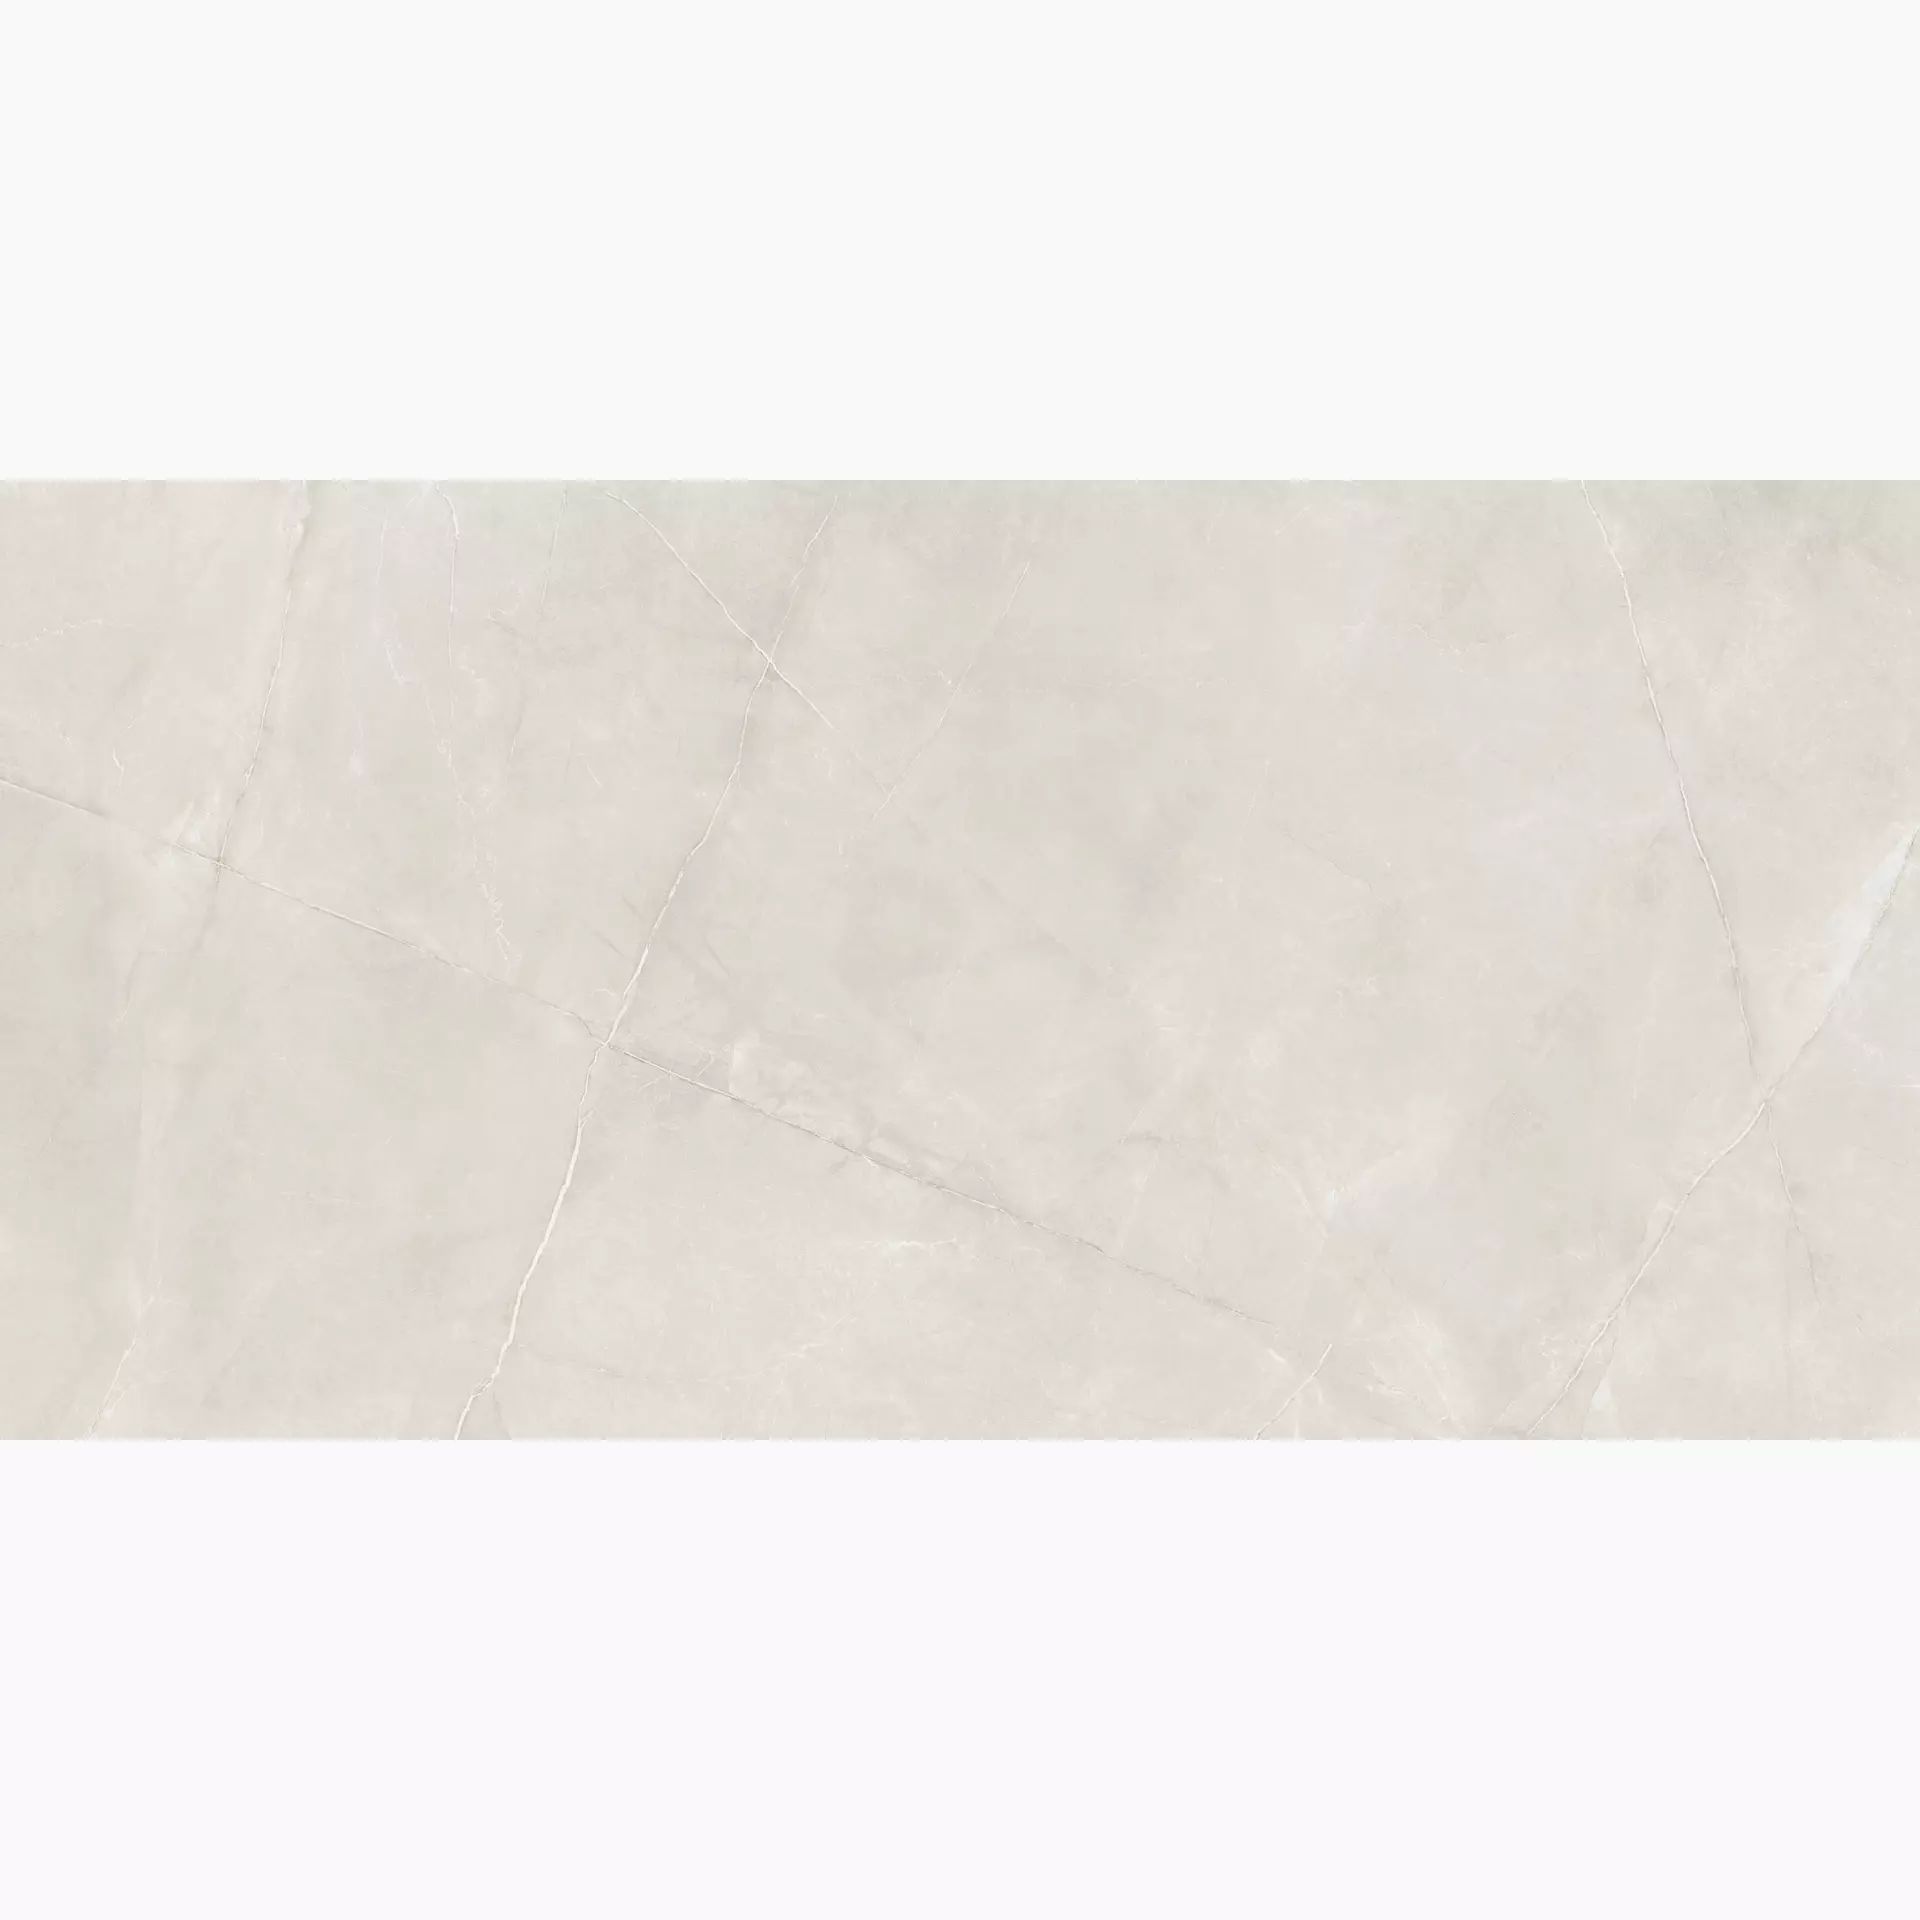 MGM Lux White Levigato LUXWHILEV6012 60x120cm rectified 10mm